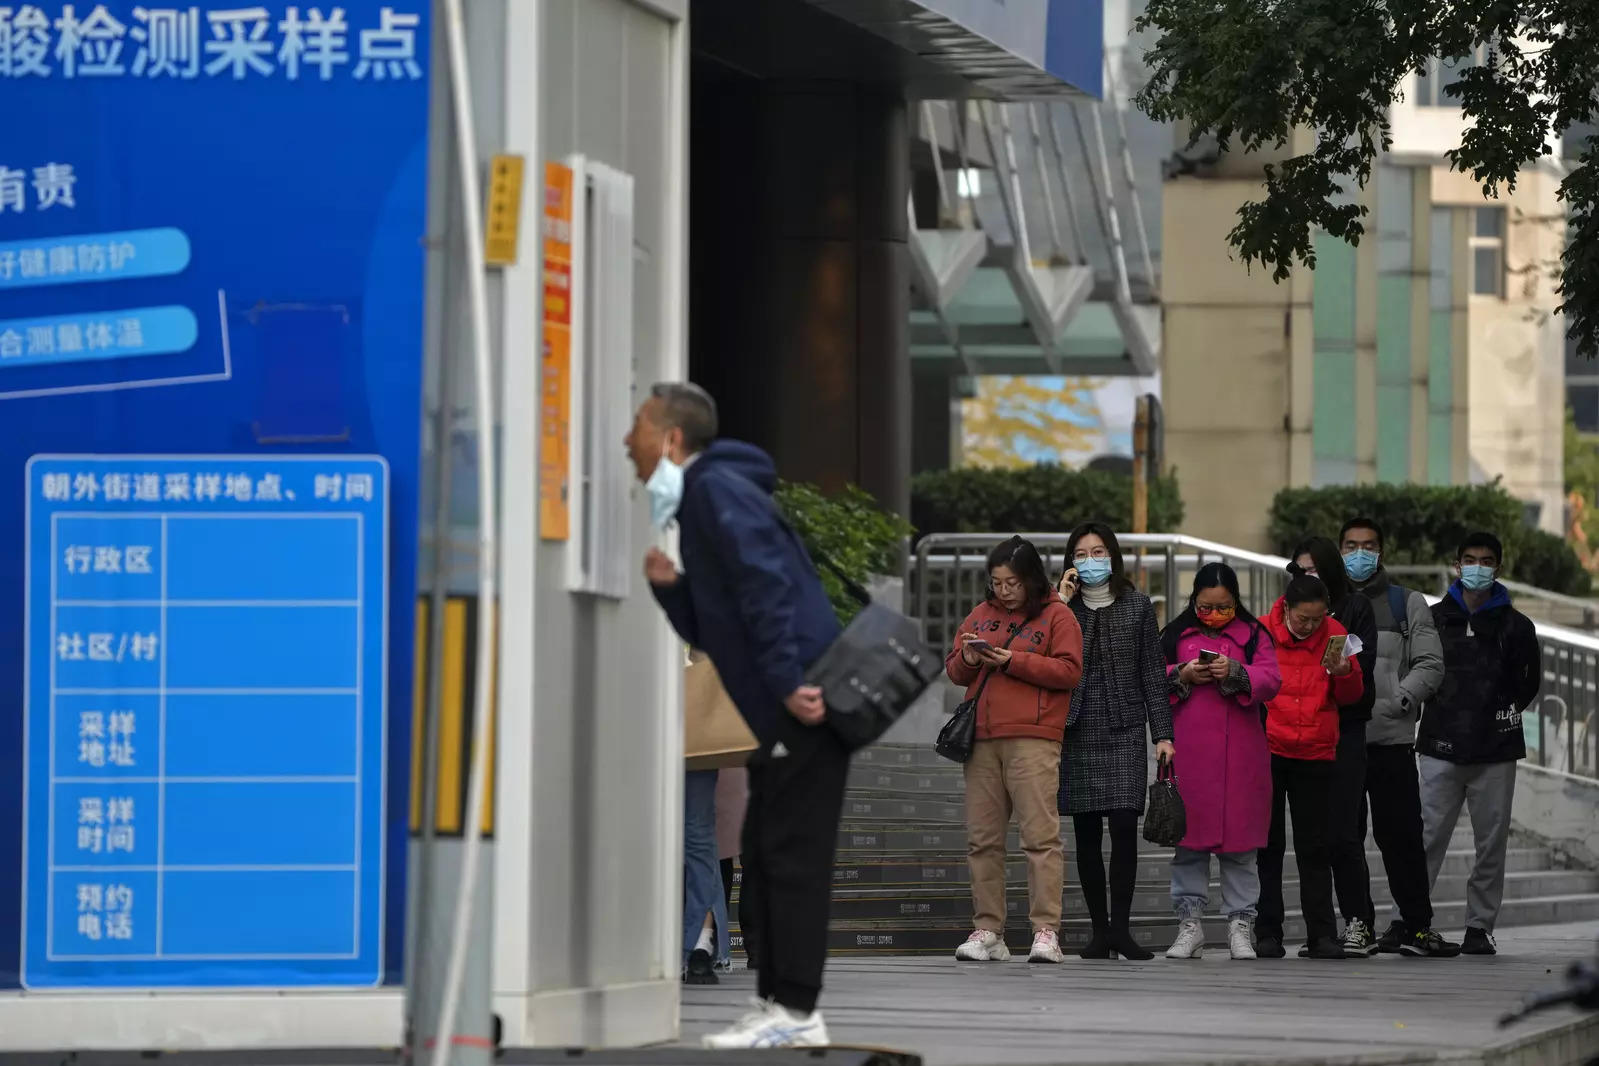 People wait in line for their routine Covid-19 throat swabs at a coronavirus testing site setup along a pedestrian walkway in Beijing